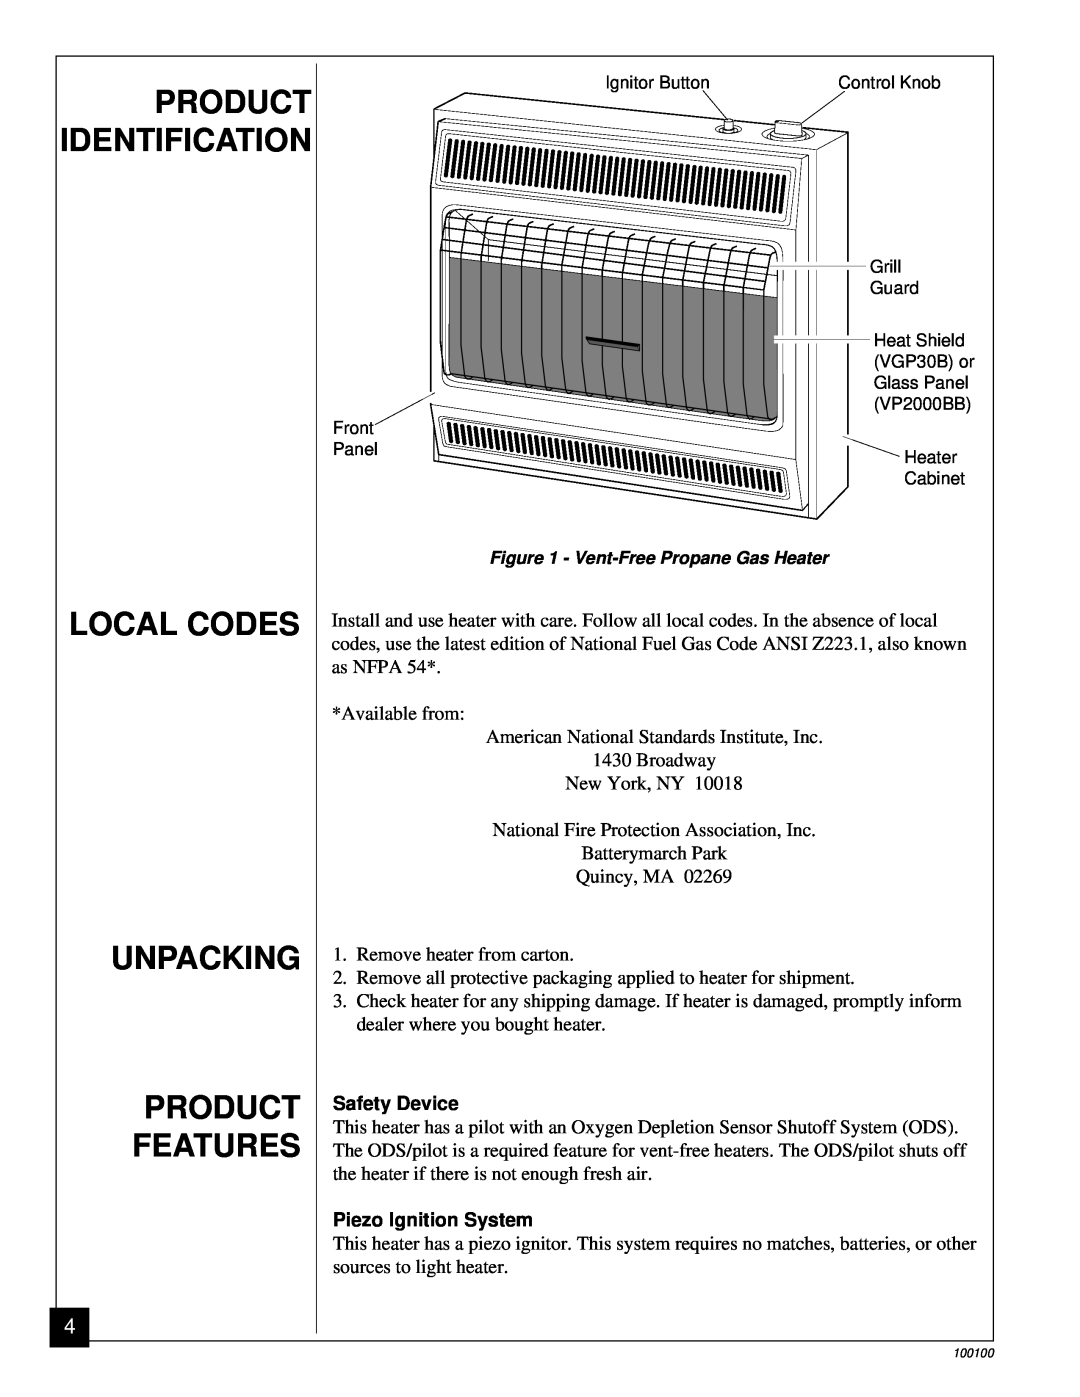 Vanguard Heating VP2000BB, VGP30B Product Identification, Local Codes Unpacking Product Features, Safety Device 